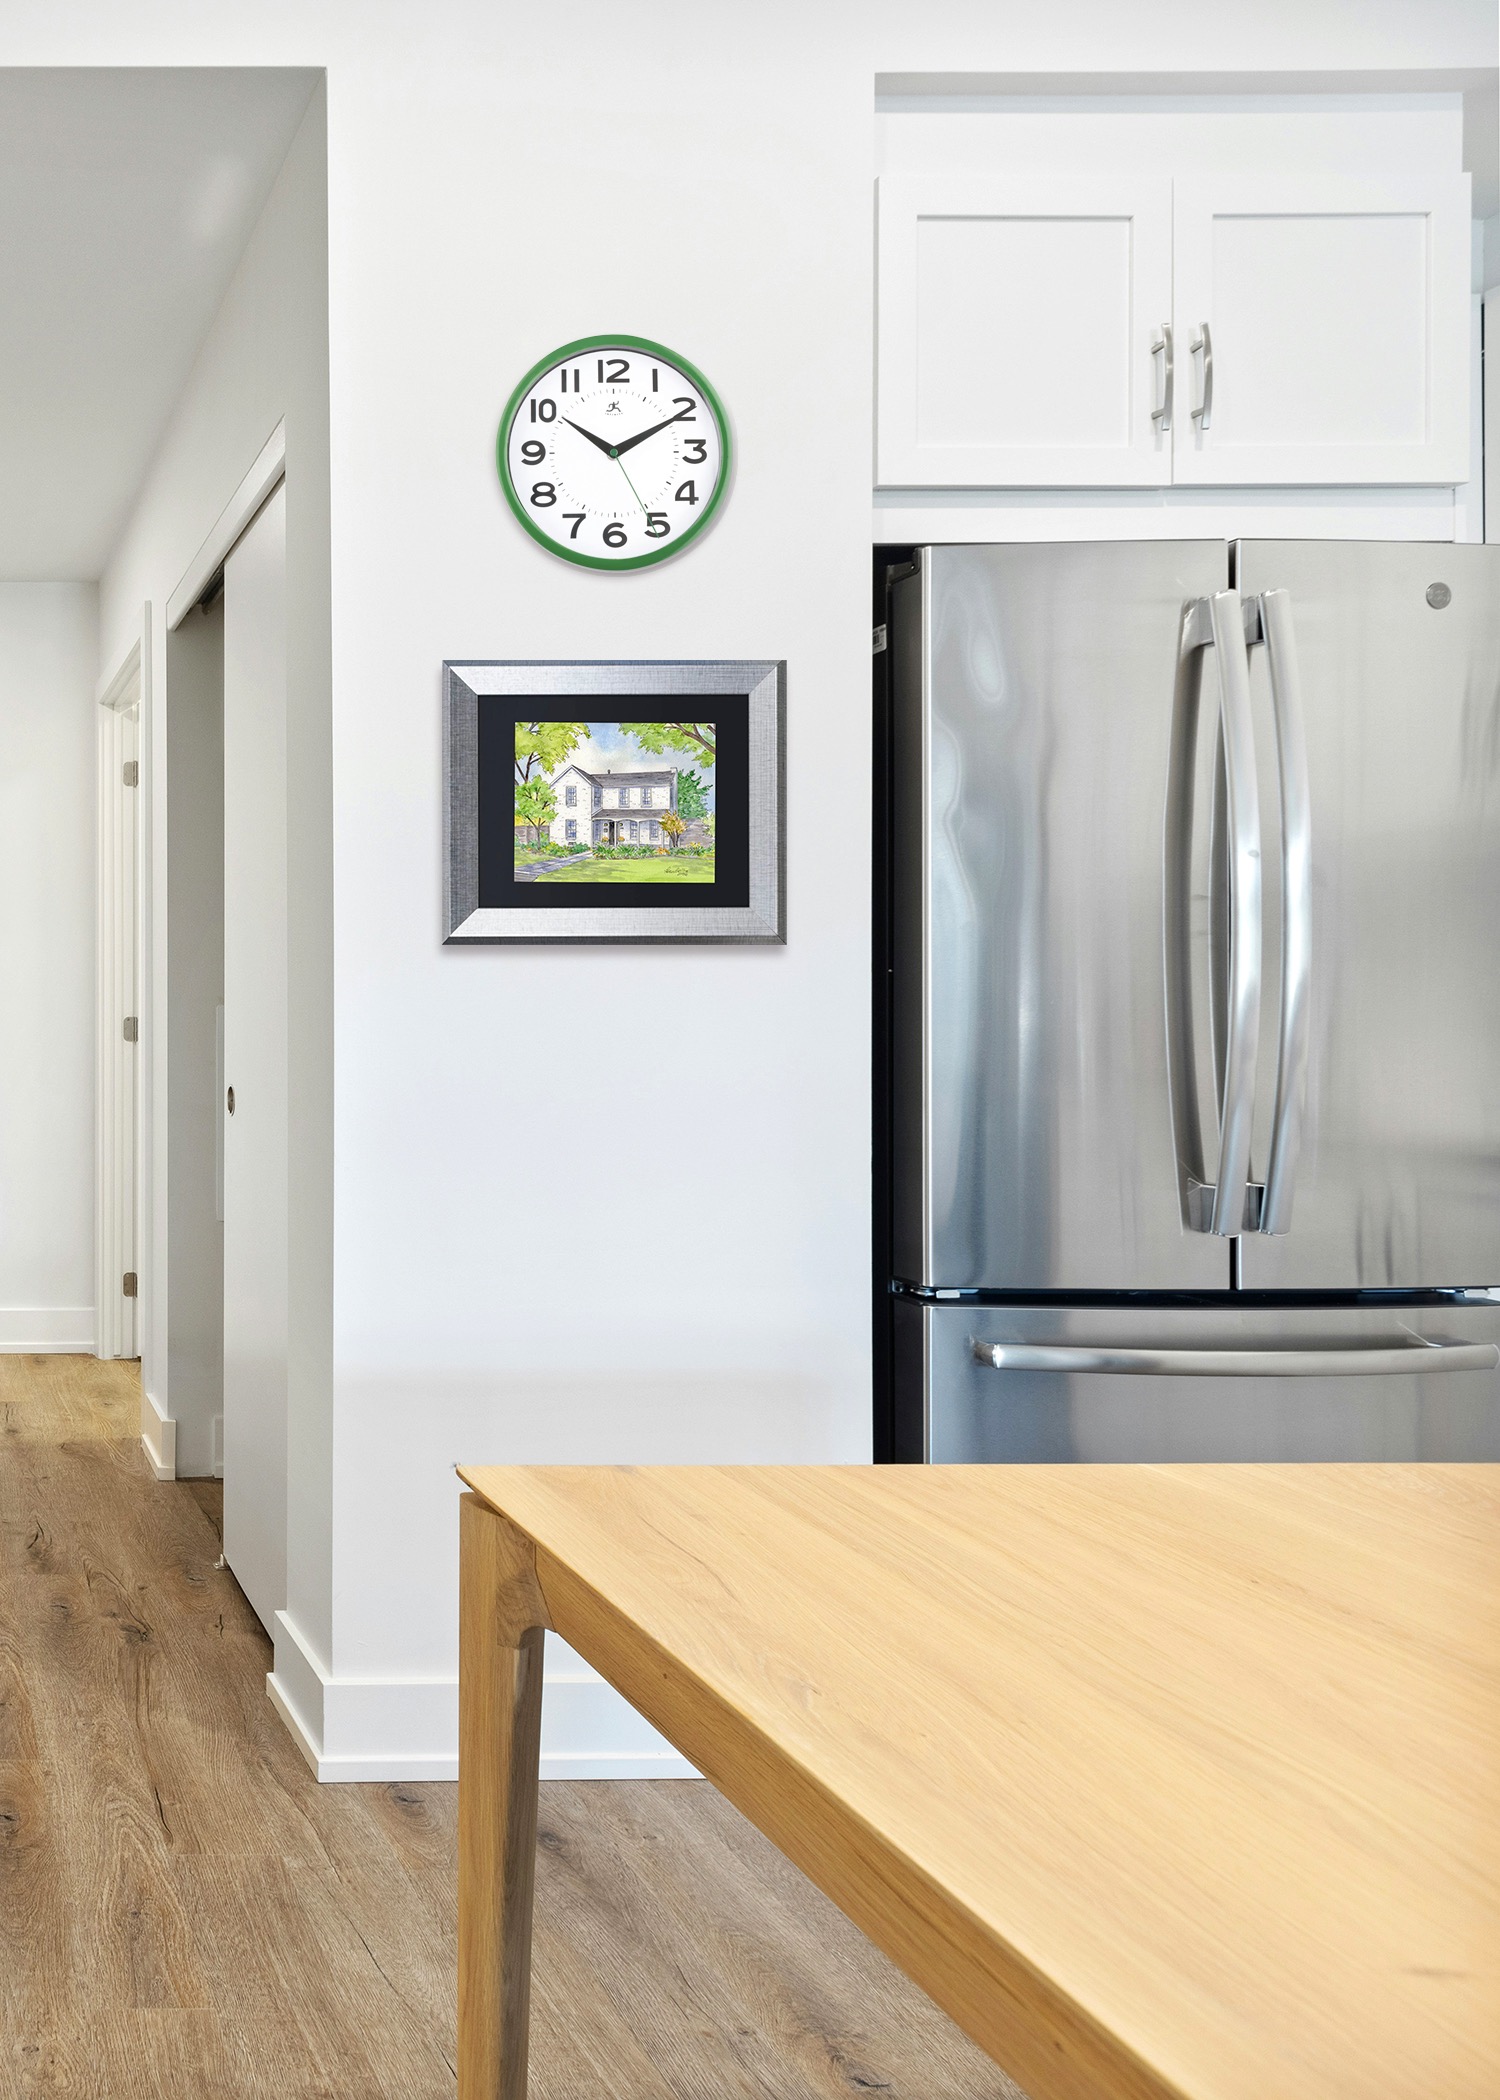 A house portrait placed by the fridge is sure to be seen. The matching frame sets it off.